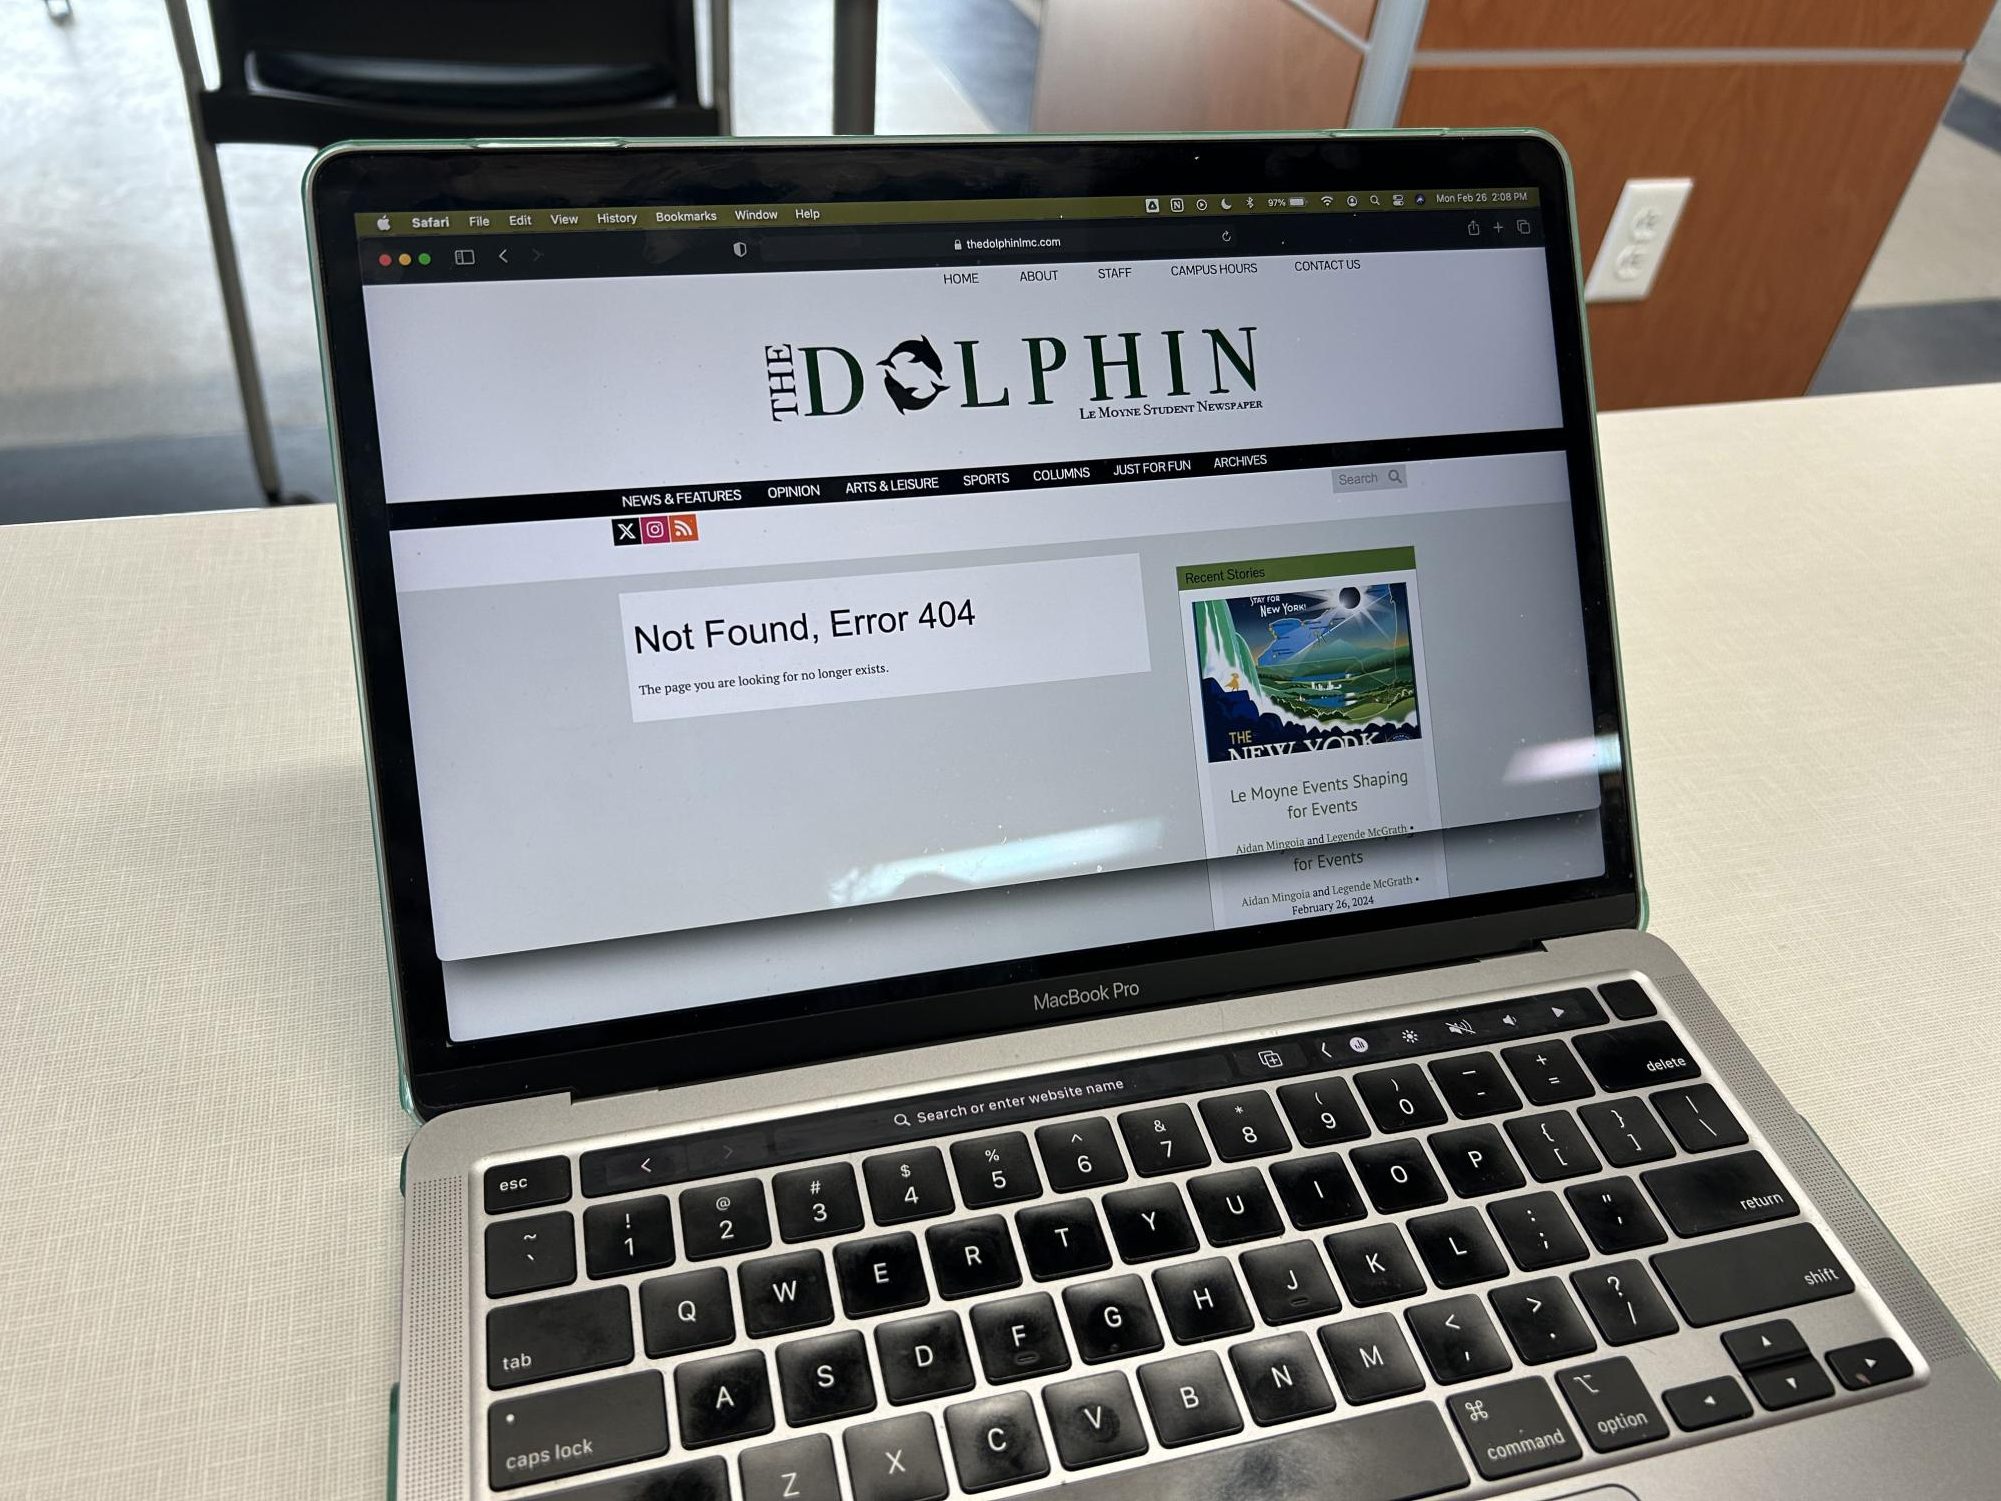 The Dolphin Goes Offline: Copyright Issues Force Paper to Remove Majority of Articles